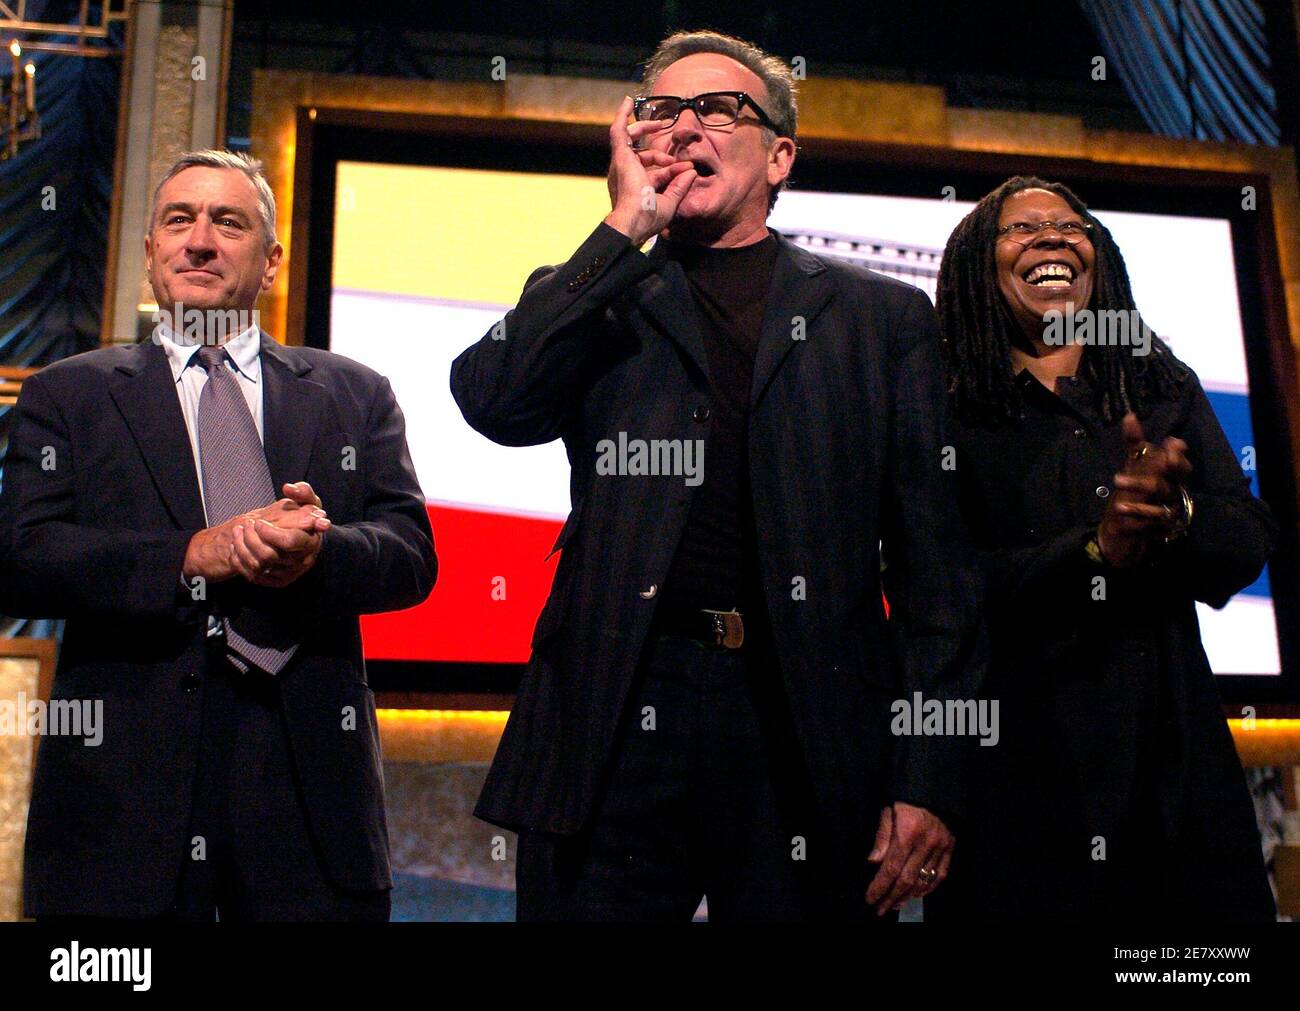 Actor-comedian Robin Williams (C) gestures on stage  with actor Robert de Niro (L) and actress Whoopi Goldberg at the conclusion of the Kennedy Center's Mark Twain Prize for American Humor Gala in Washington, October 11, 2007. Billy Crystal was awarded the 10th annual prize.    REUTERS/Mike Theiler (United States) Stock Photo